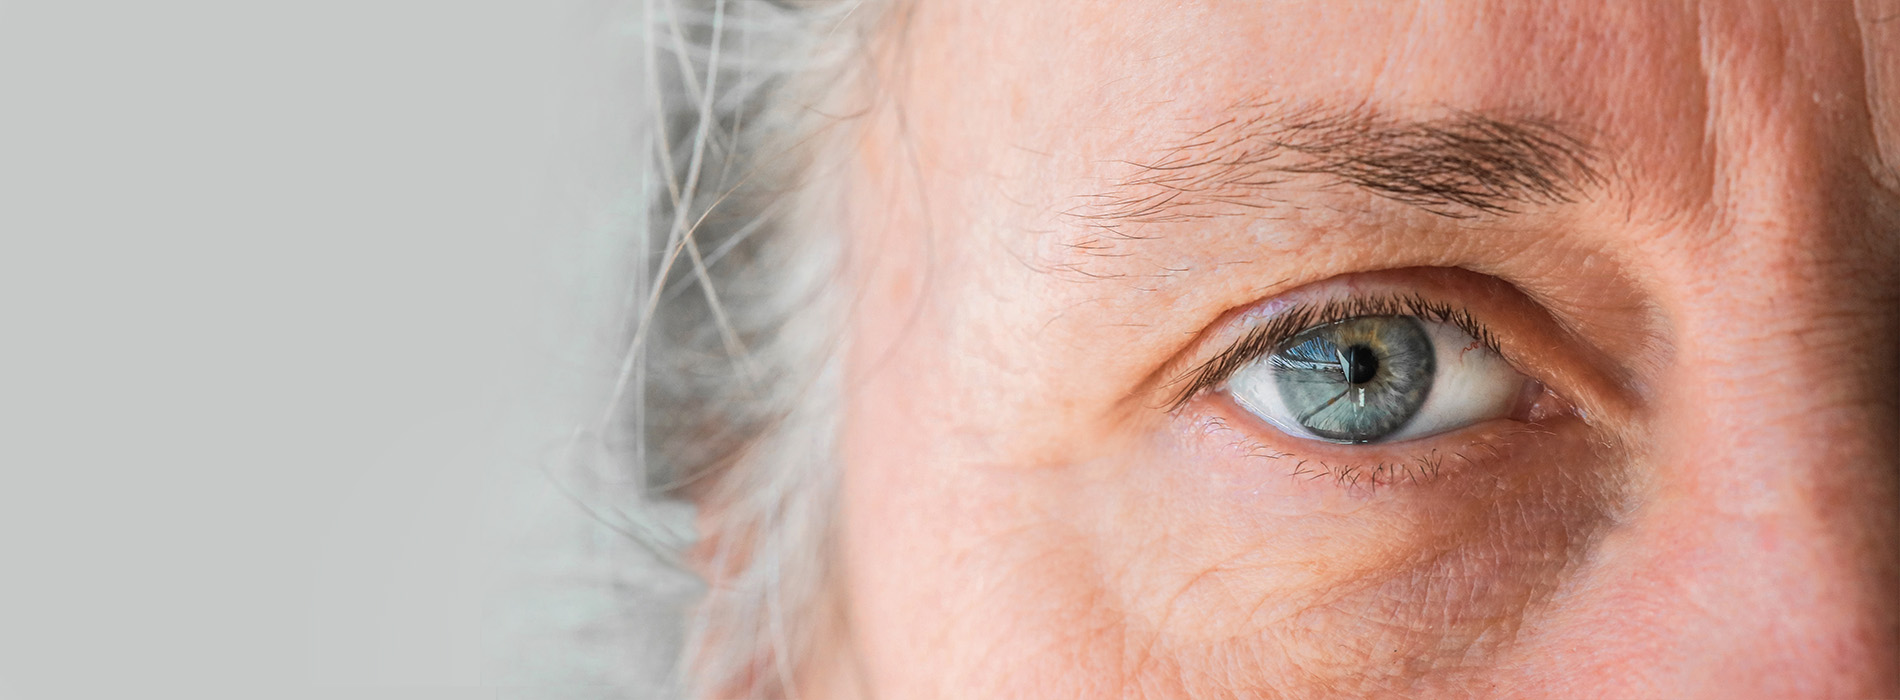 Mountain View Eye Center | Diabetic Retinopathy, Glaucoma and Financing Options